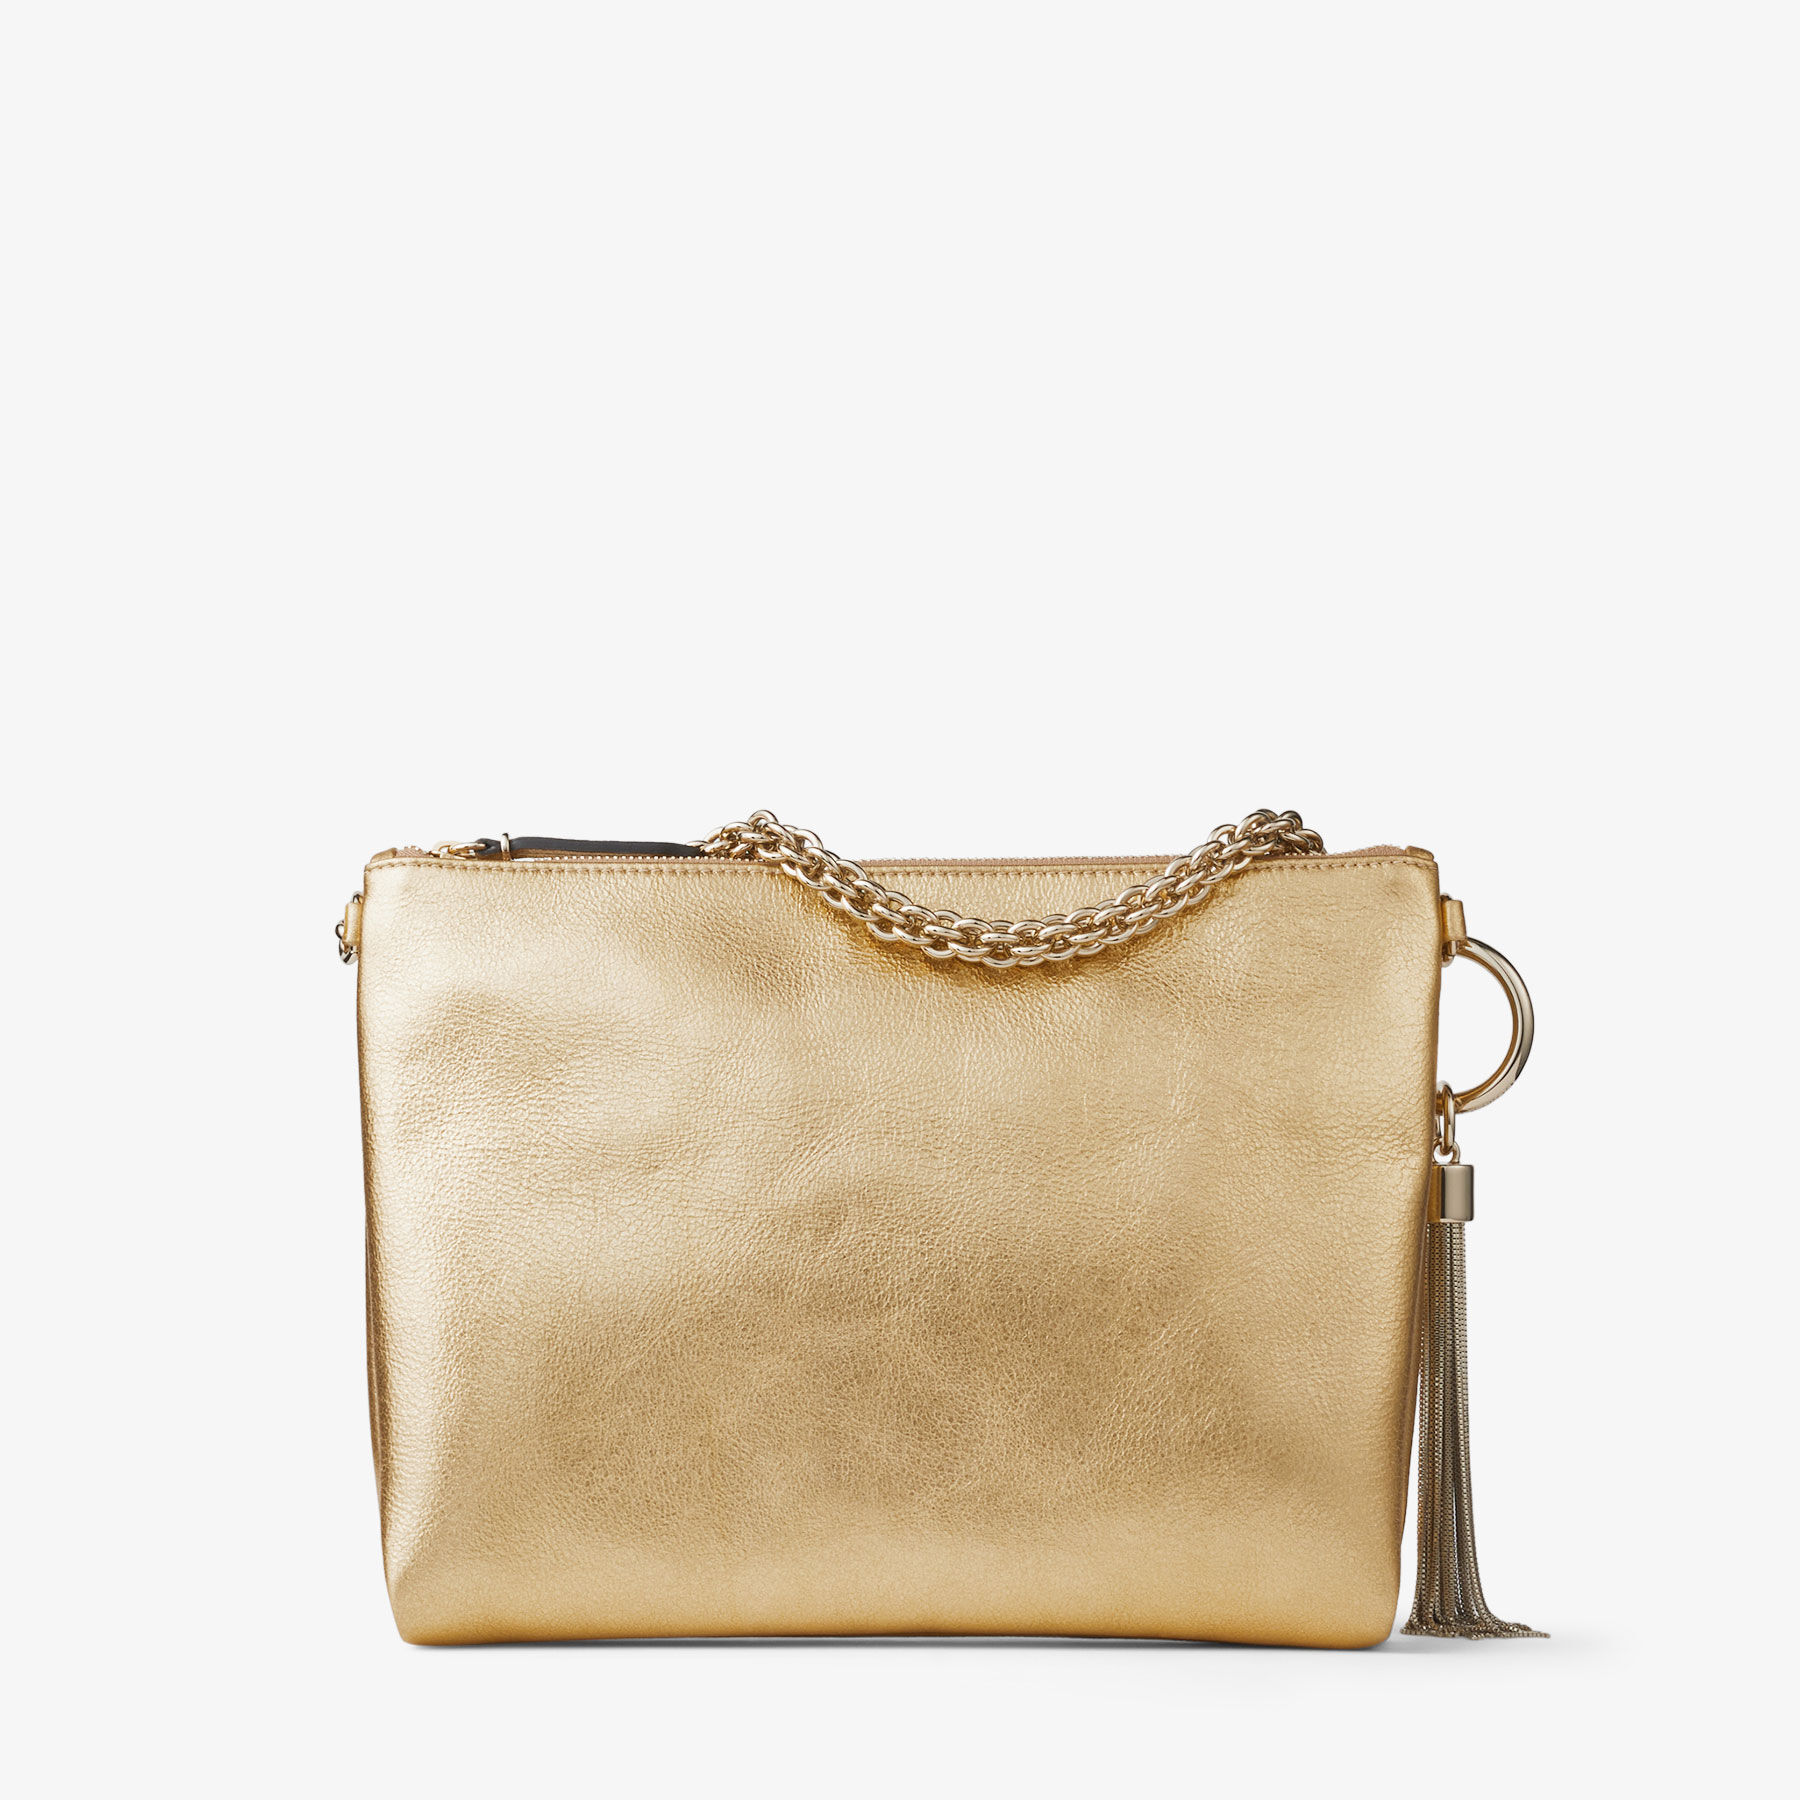 Gold Metallic Leather Clutch Bag With Chain Strap | CALLIE | Pre